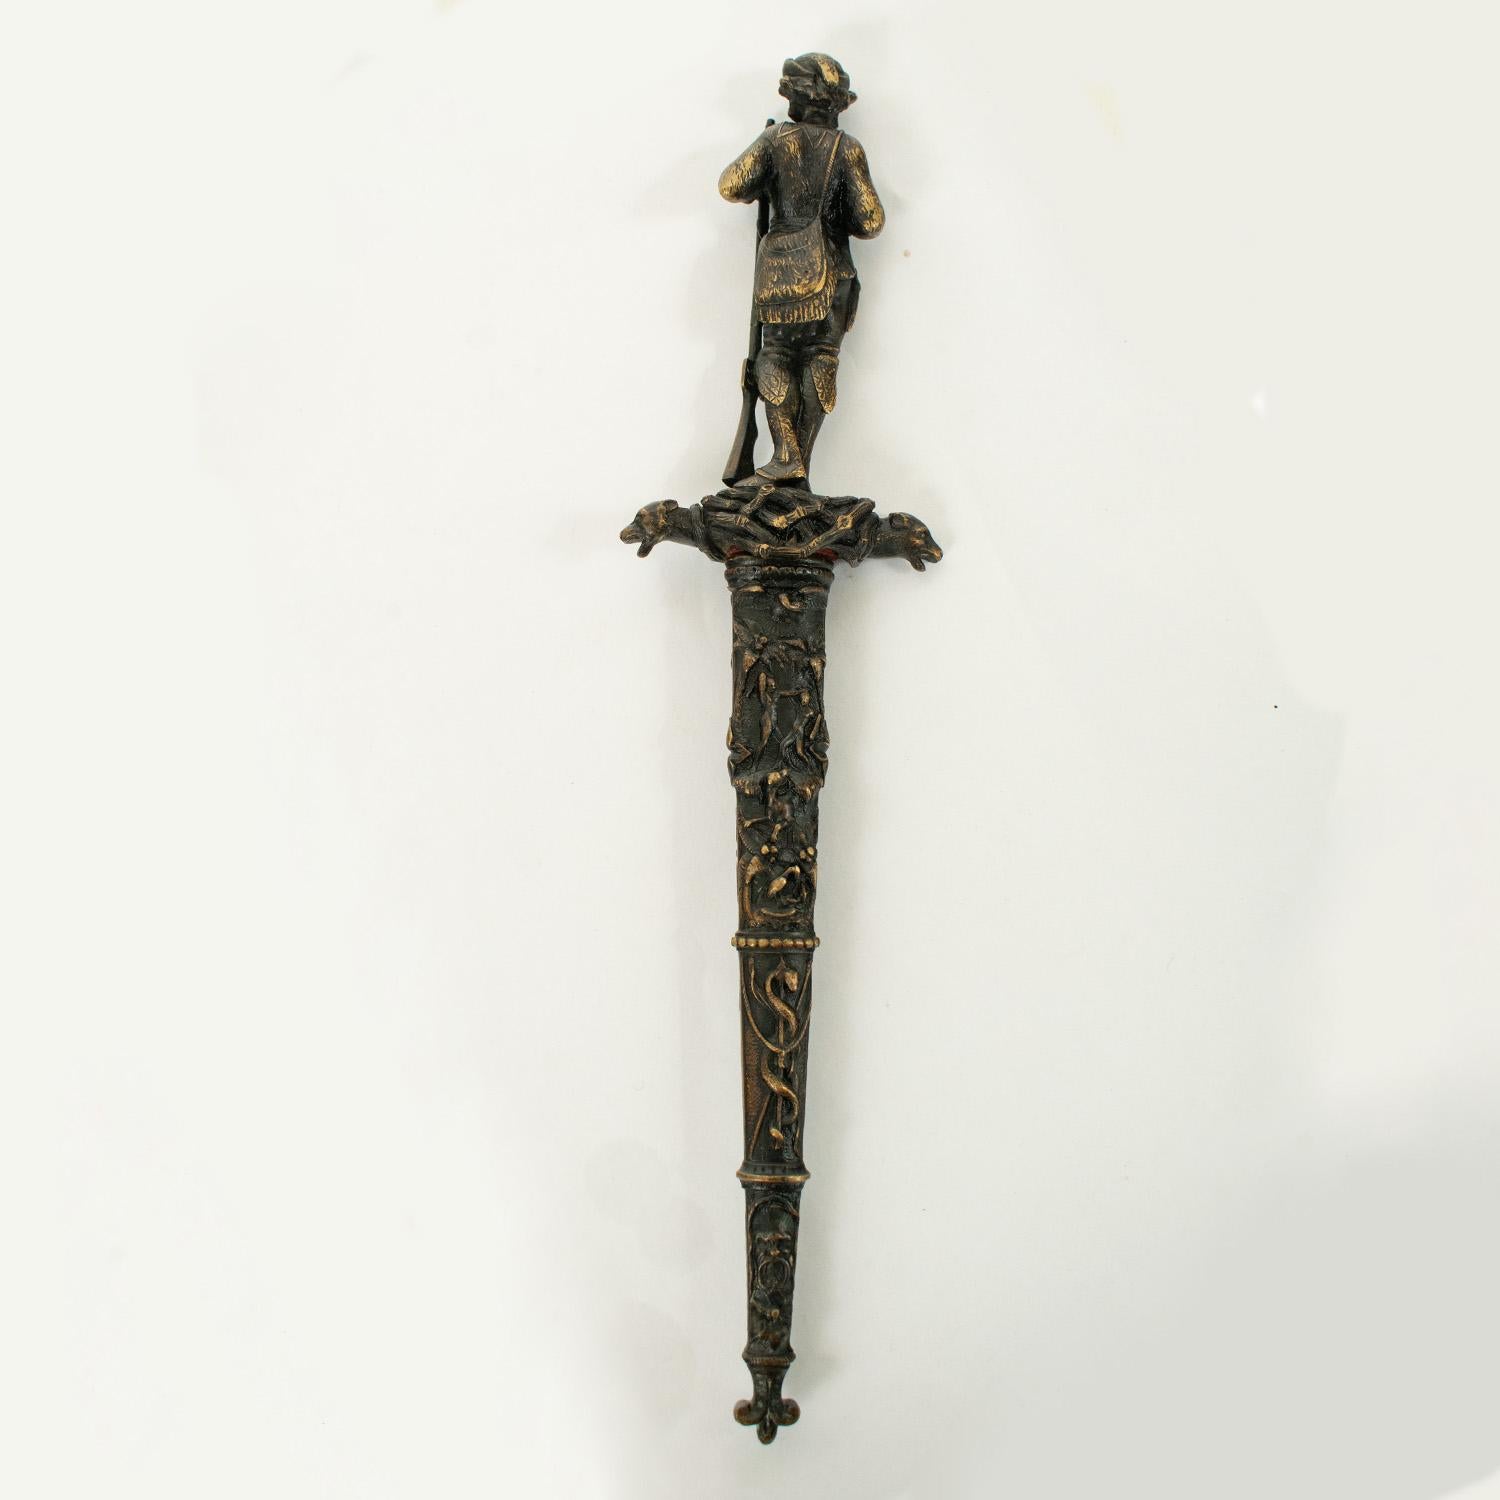 19th Century AMERICAN THEMED Romantic Dagger - early to mid 19th century - Spanish For Sale